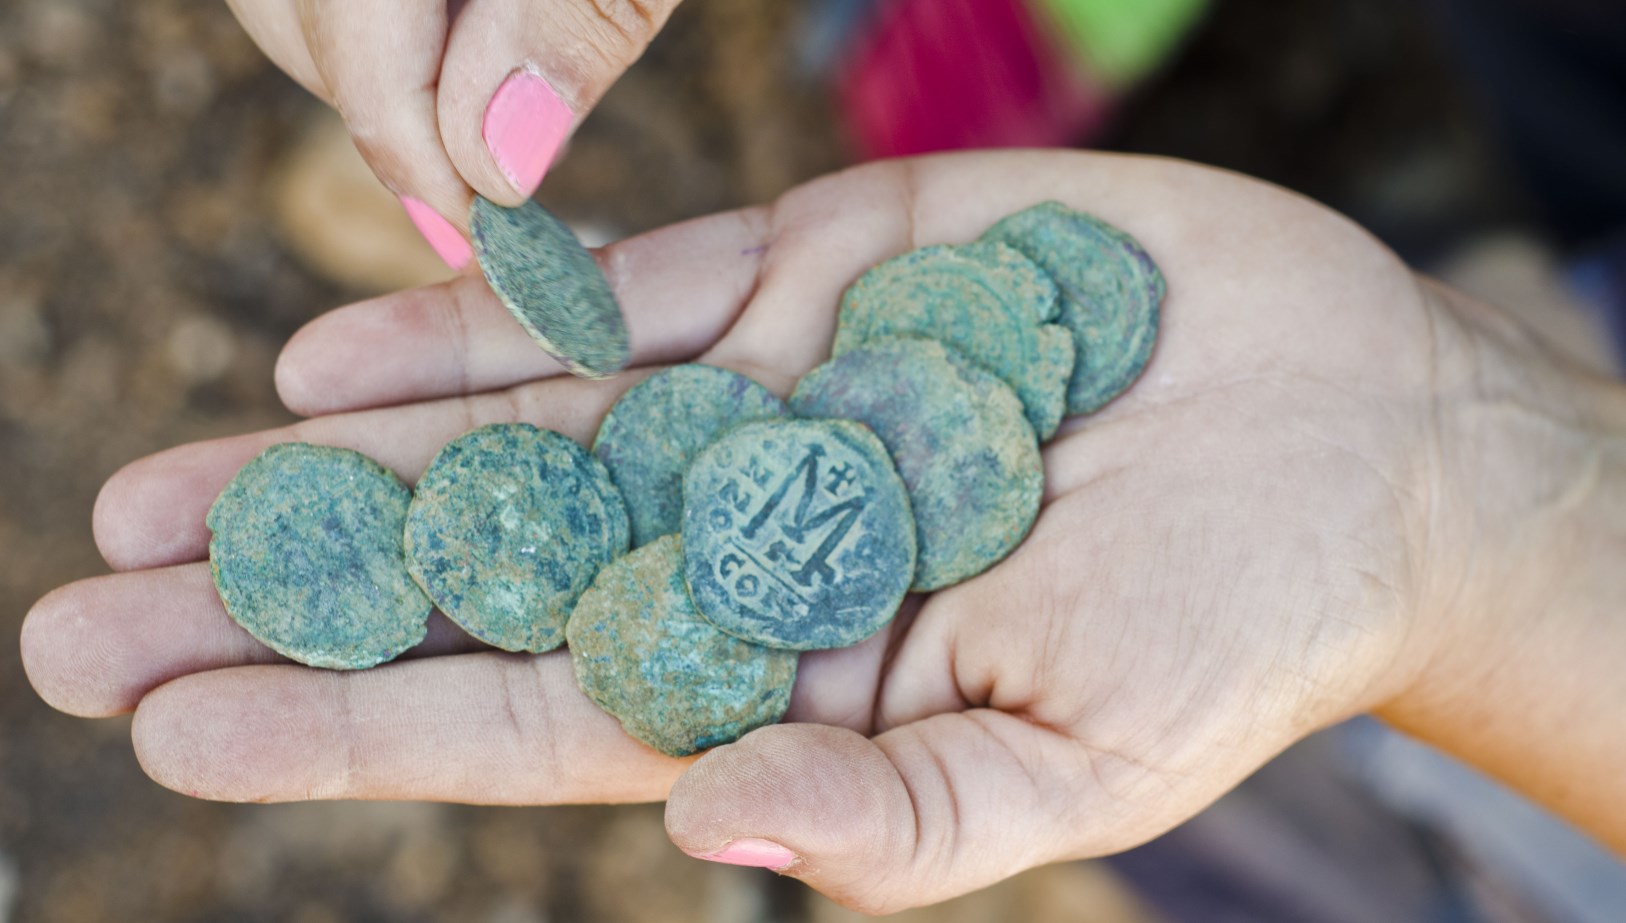 The cache of Byzantine coins in the hands of Annette Landes-Nager, excavation director on behalf of the Israel Antiquities Authority. Photo by Yoli Shwartz/IAA